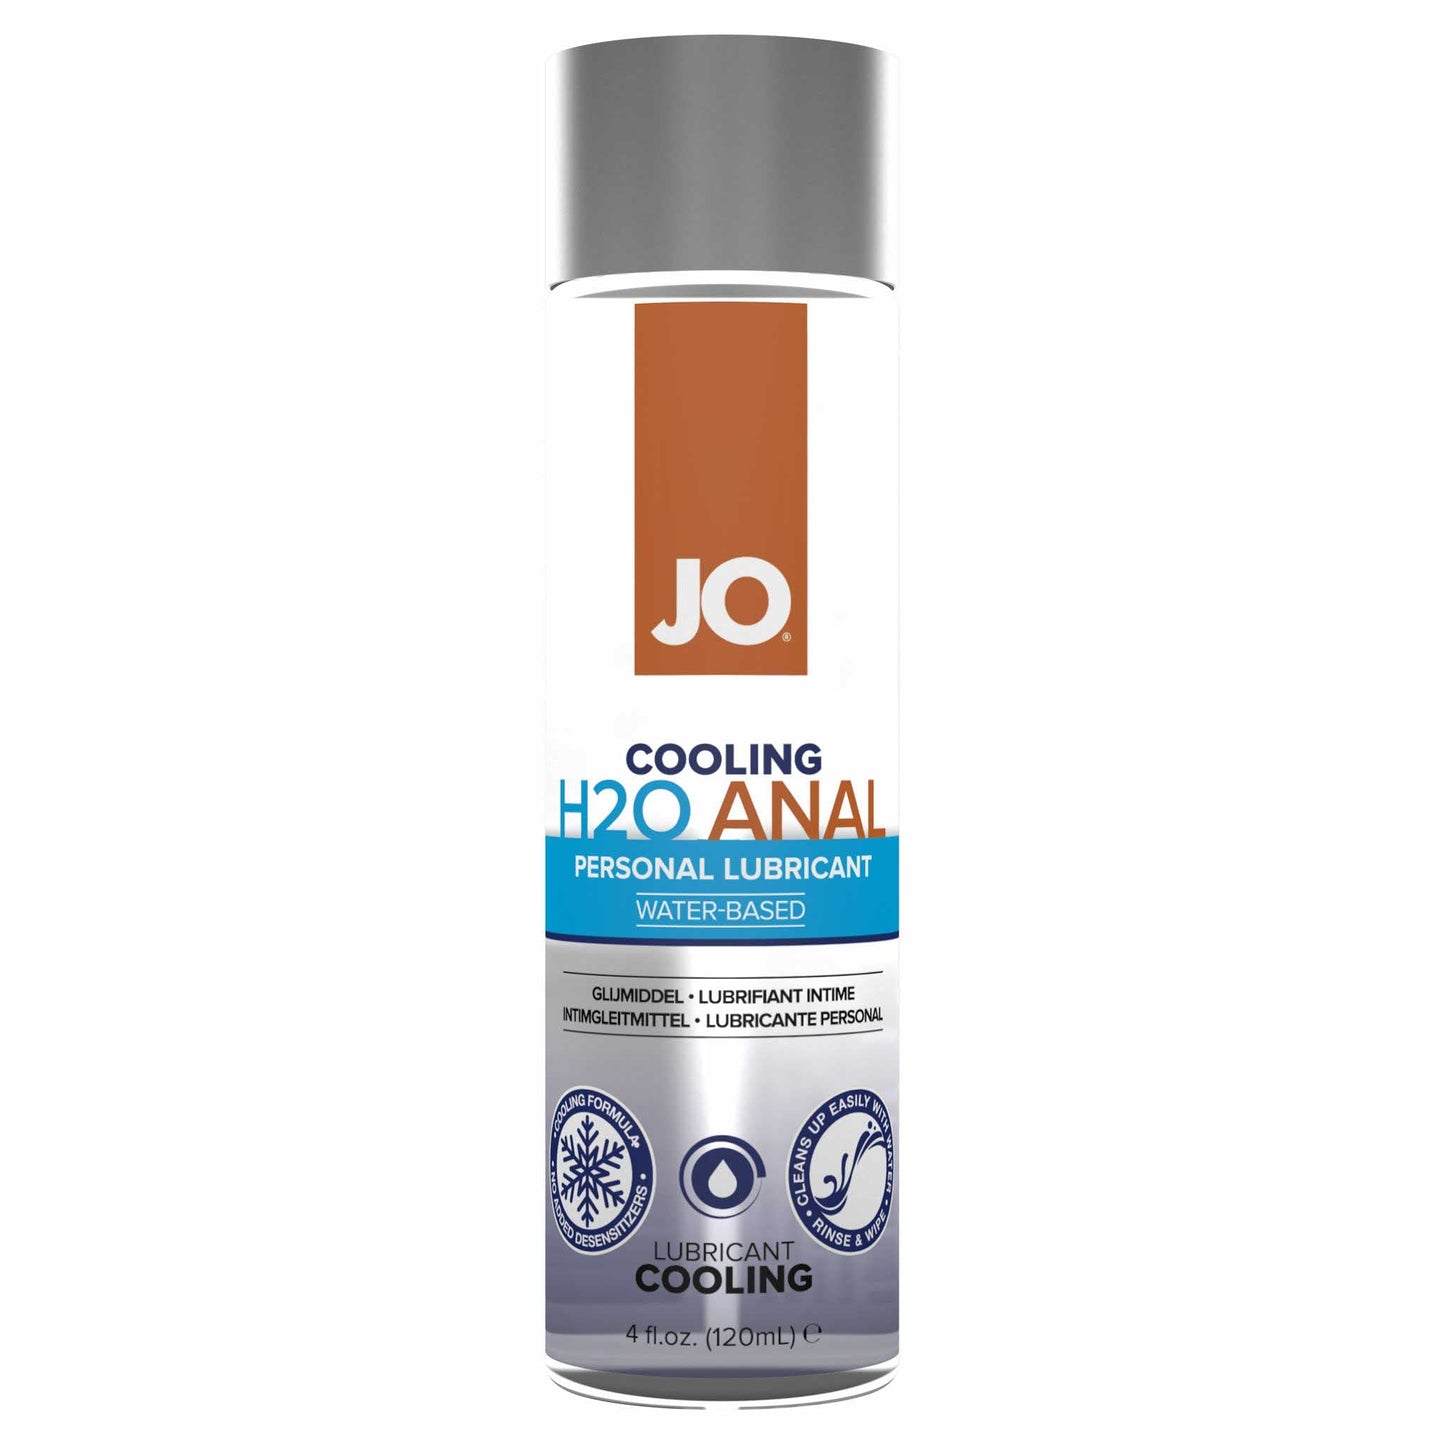 front view of the jo h2o anal water-based personal lubricant cooling 4oz